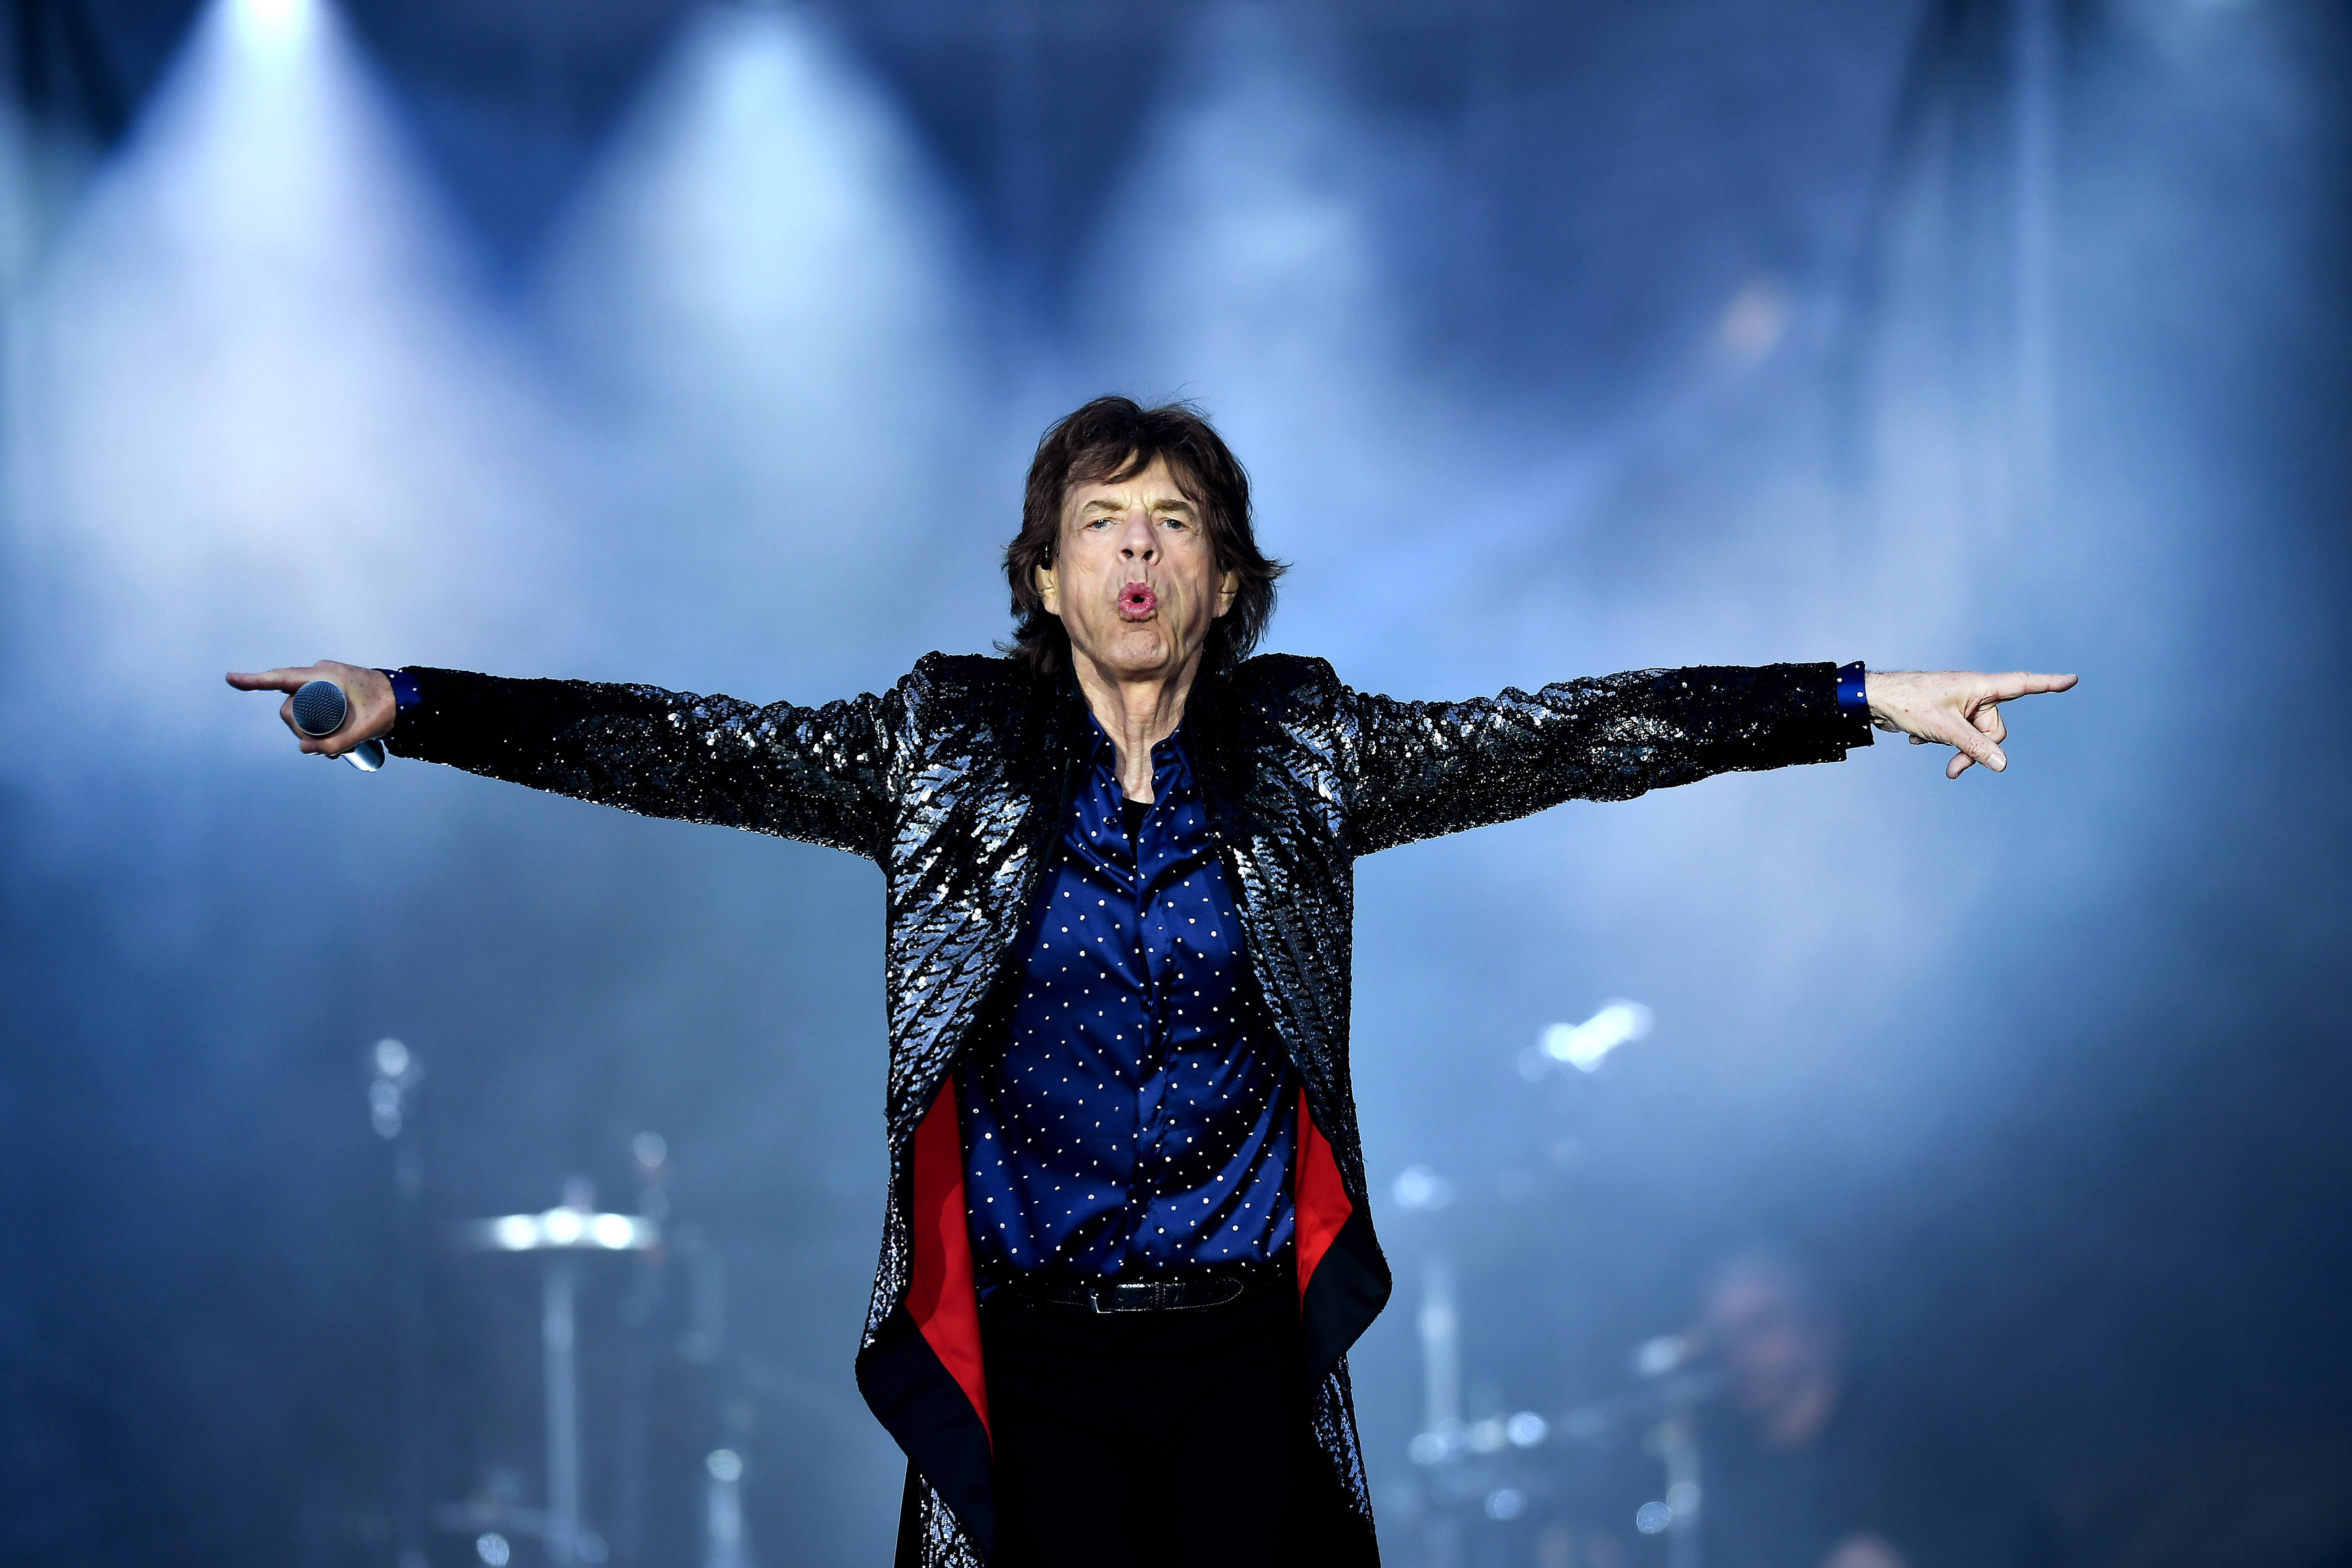 The Rolling Stones 'No Filter' Tour Opening Night At Croke Park In Dublin